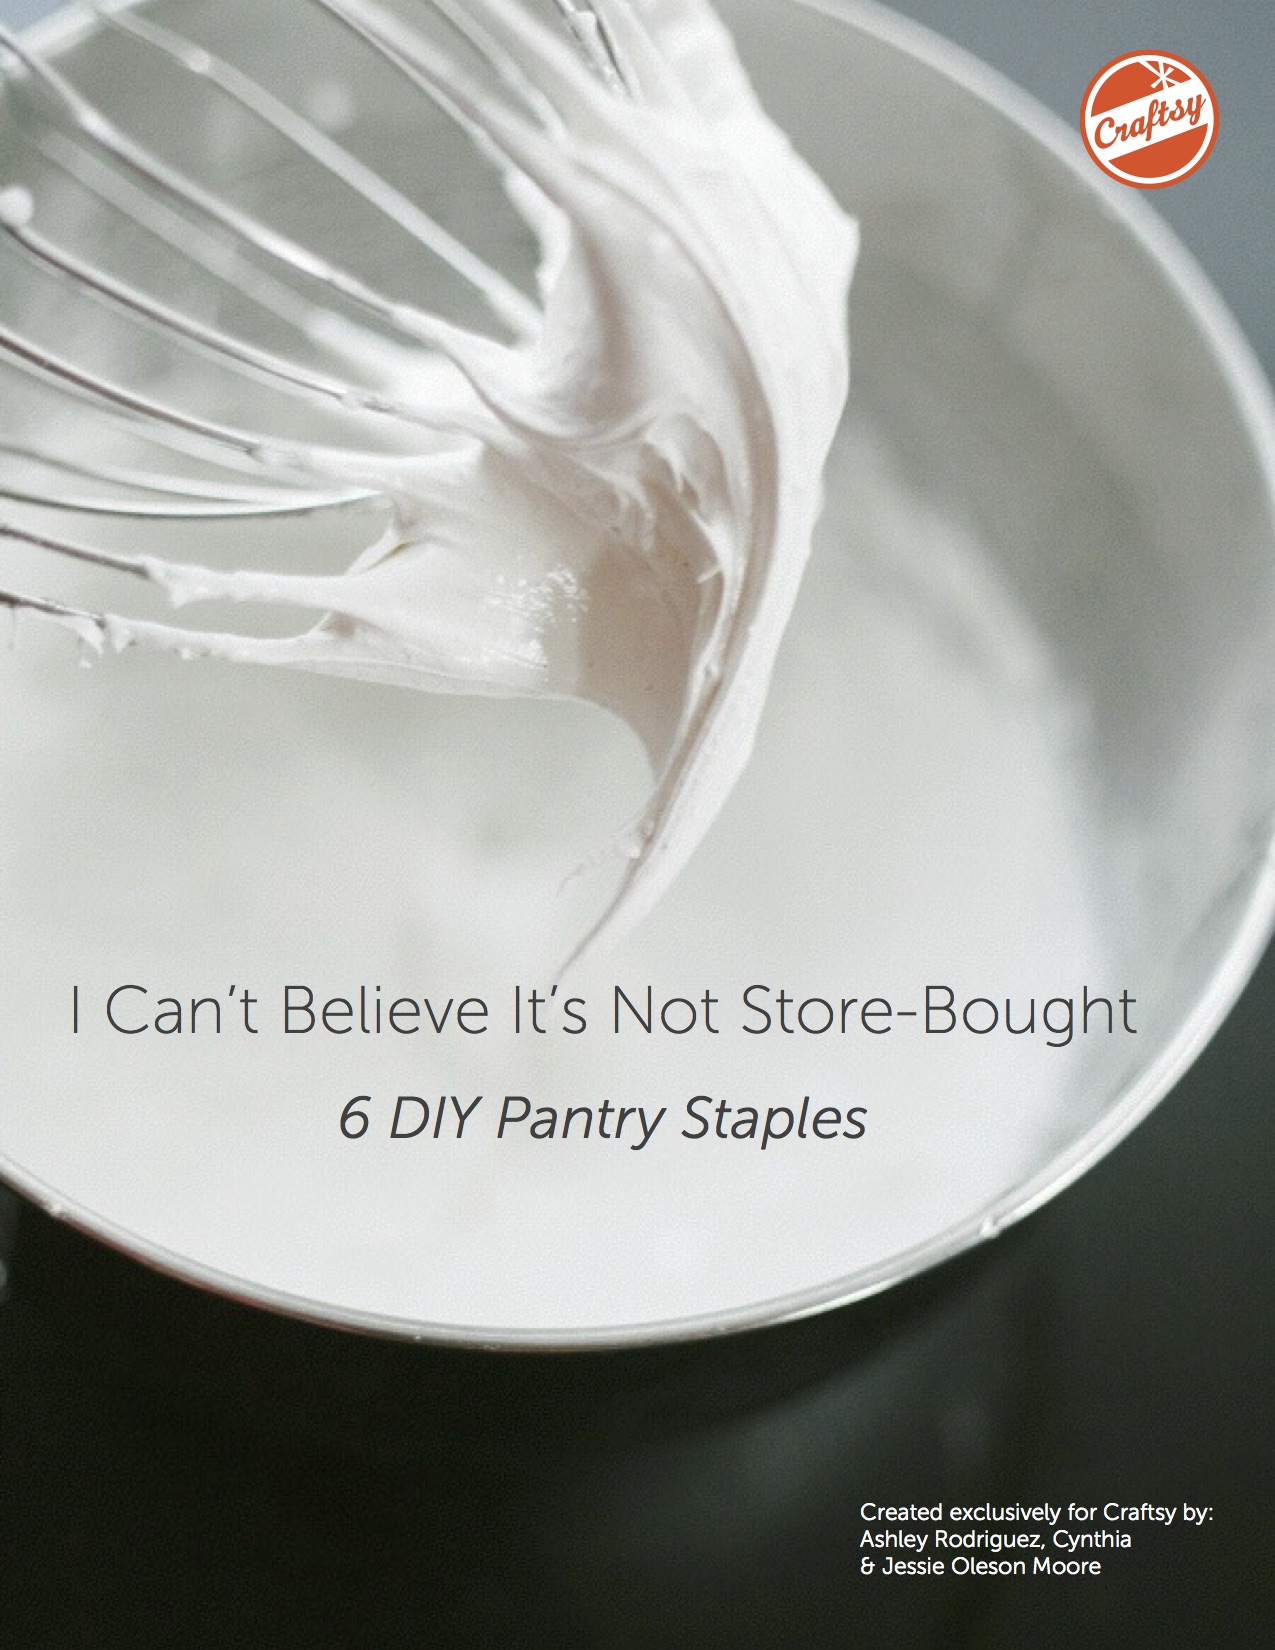 Free Craftsy Guide: I Can't Believe It's Not Store-Bough